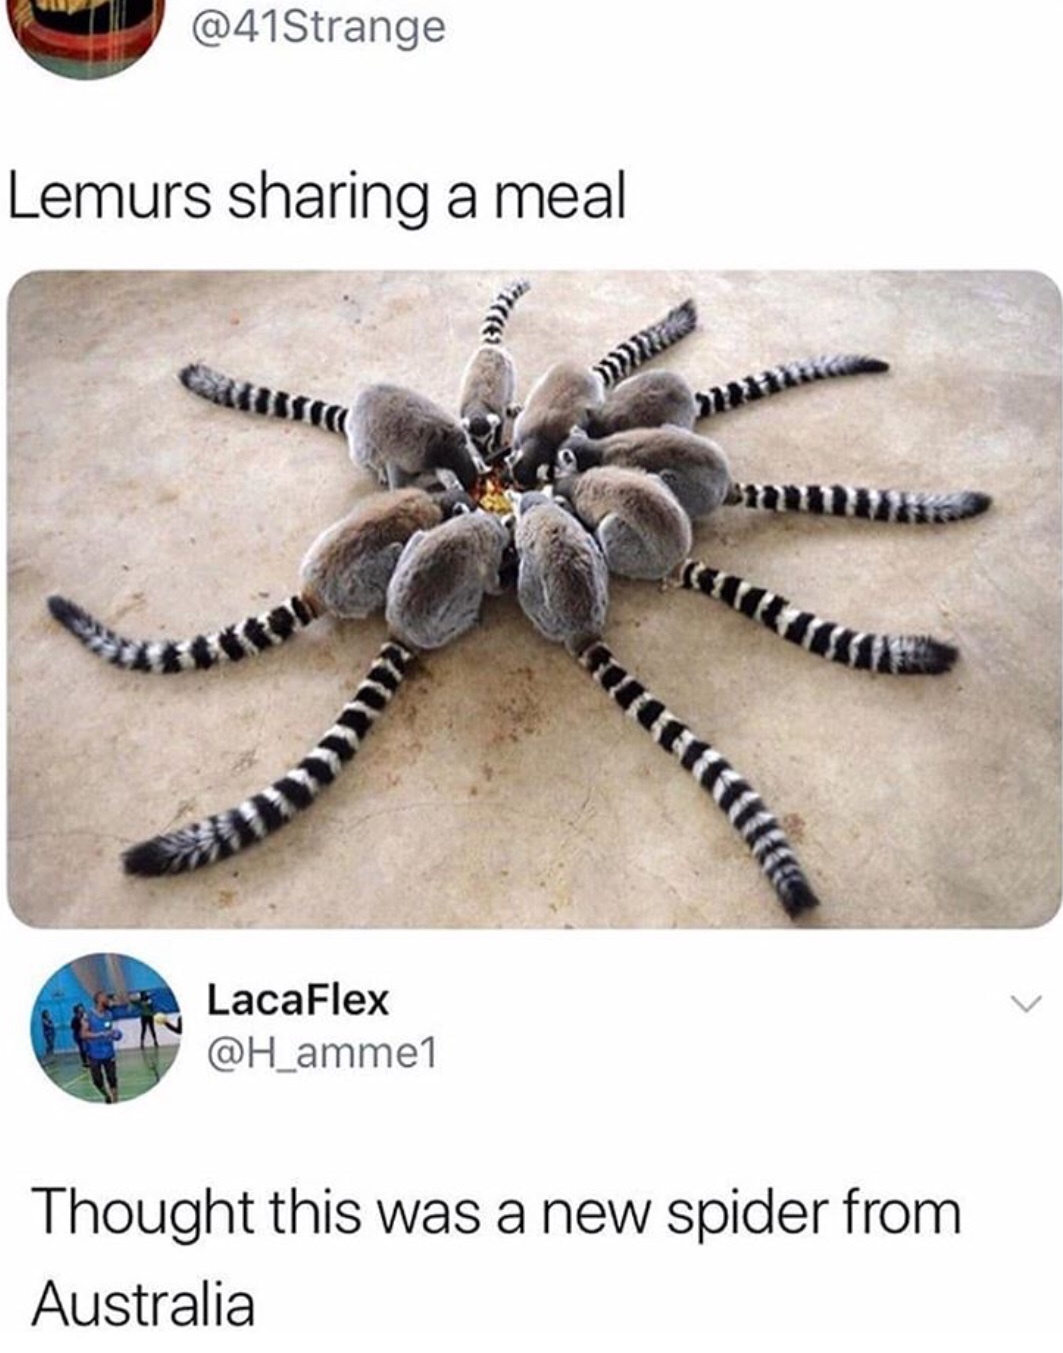 lemurs sharing a meal - Lemurs sharing a meal 5 LacaFlex Thought this was a new spider from Australia